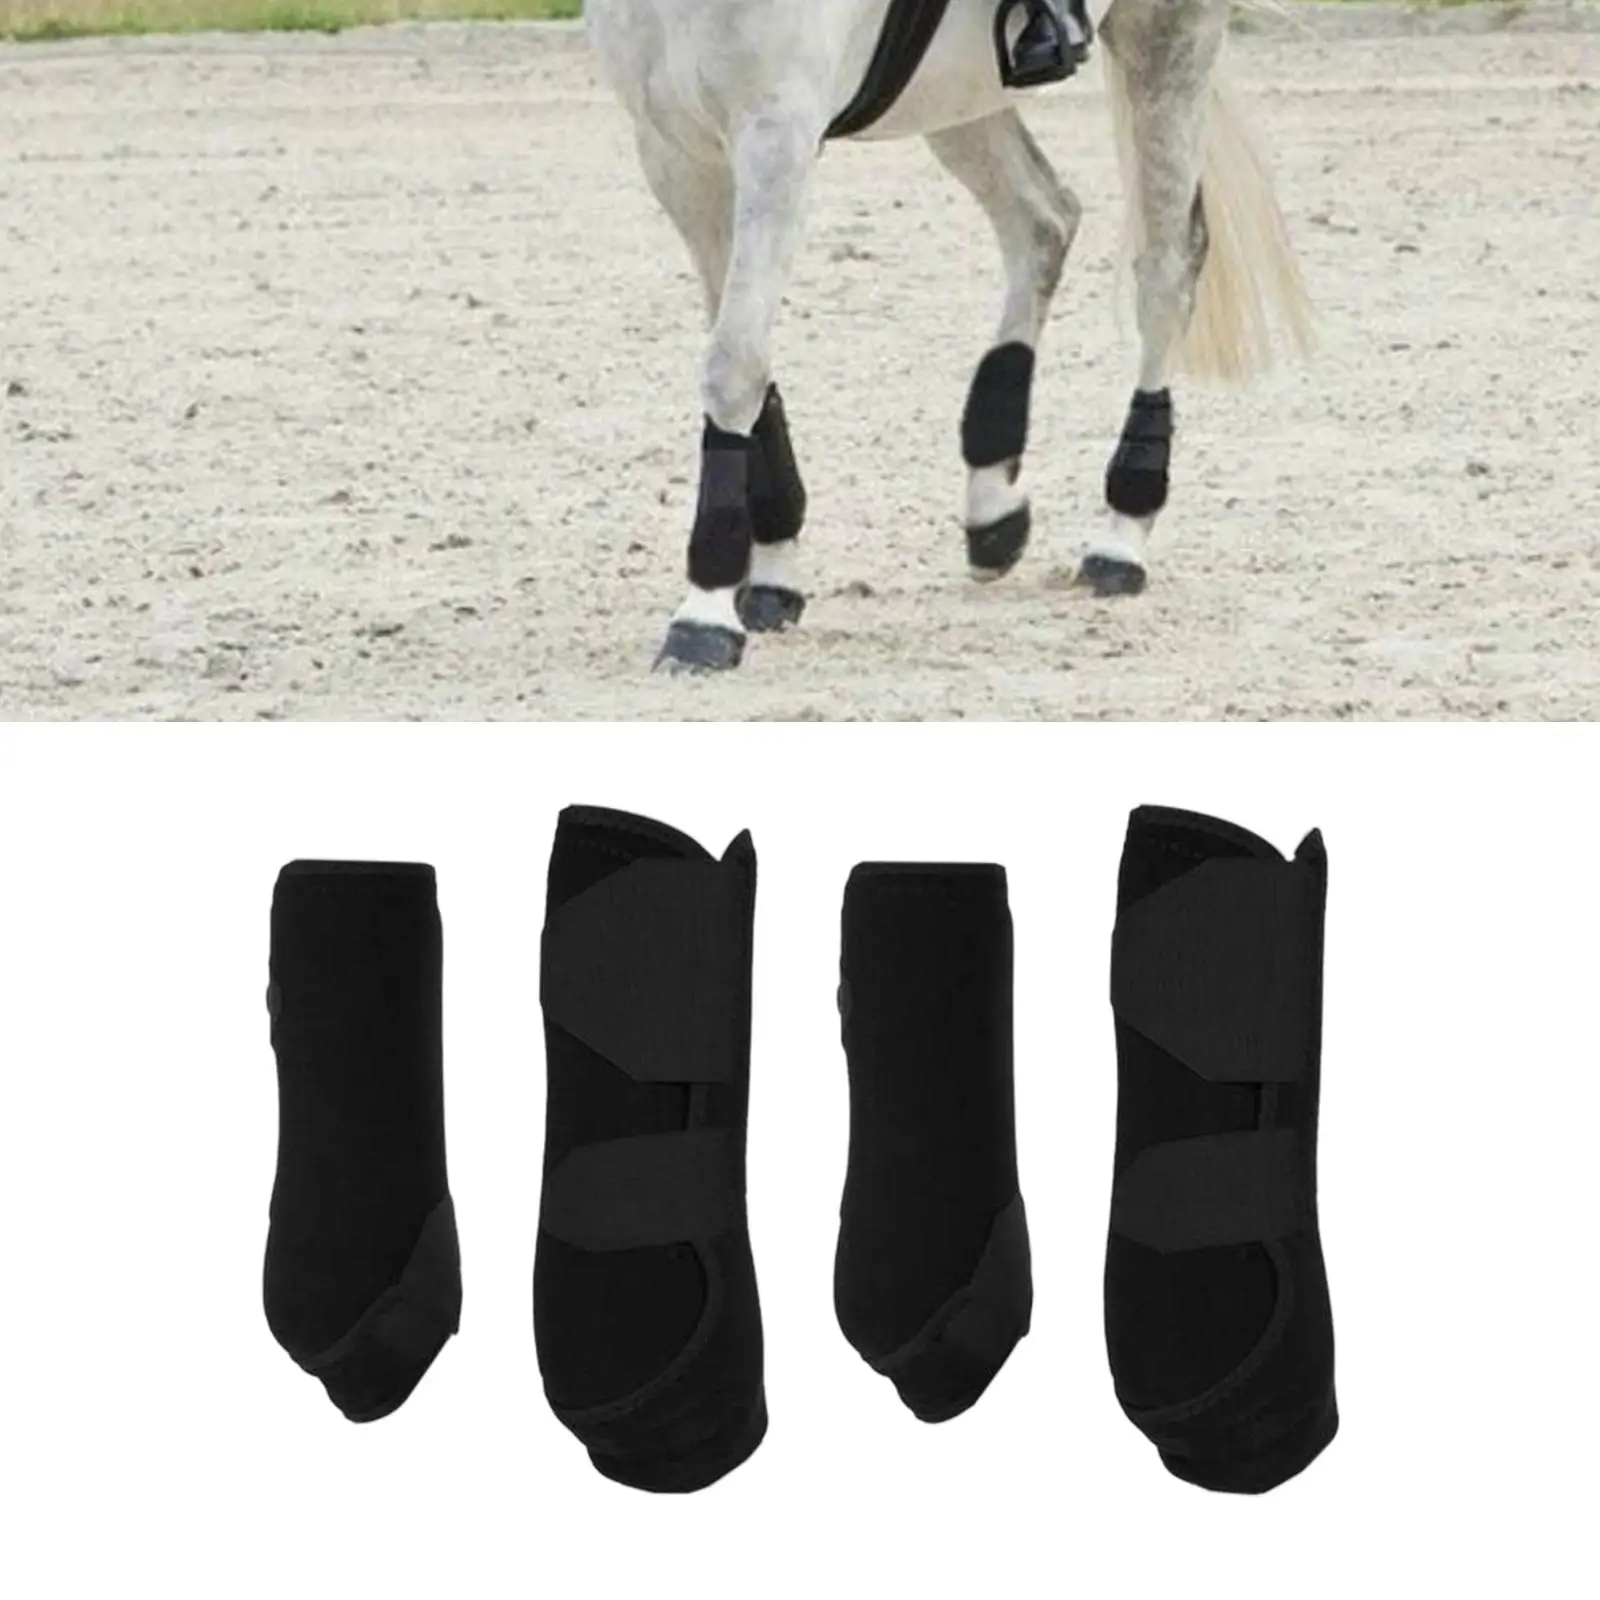 4x Horse Boots Leg Protection Wraps Protector Shock Absorbing Tendon Protection Front Hind Legs Guard for Equestrian Accessories